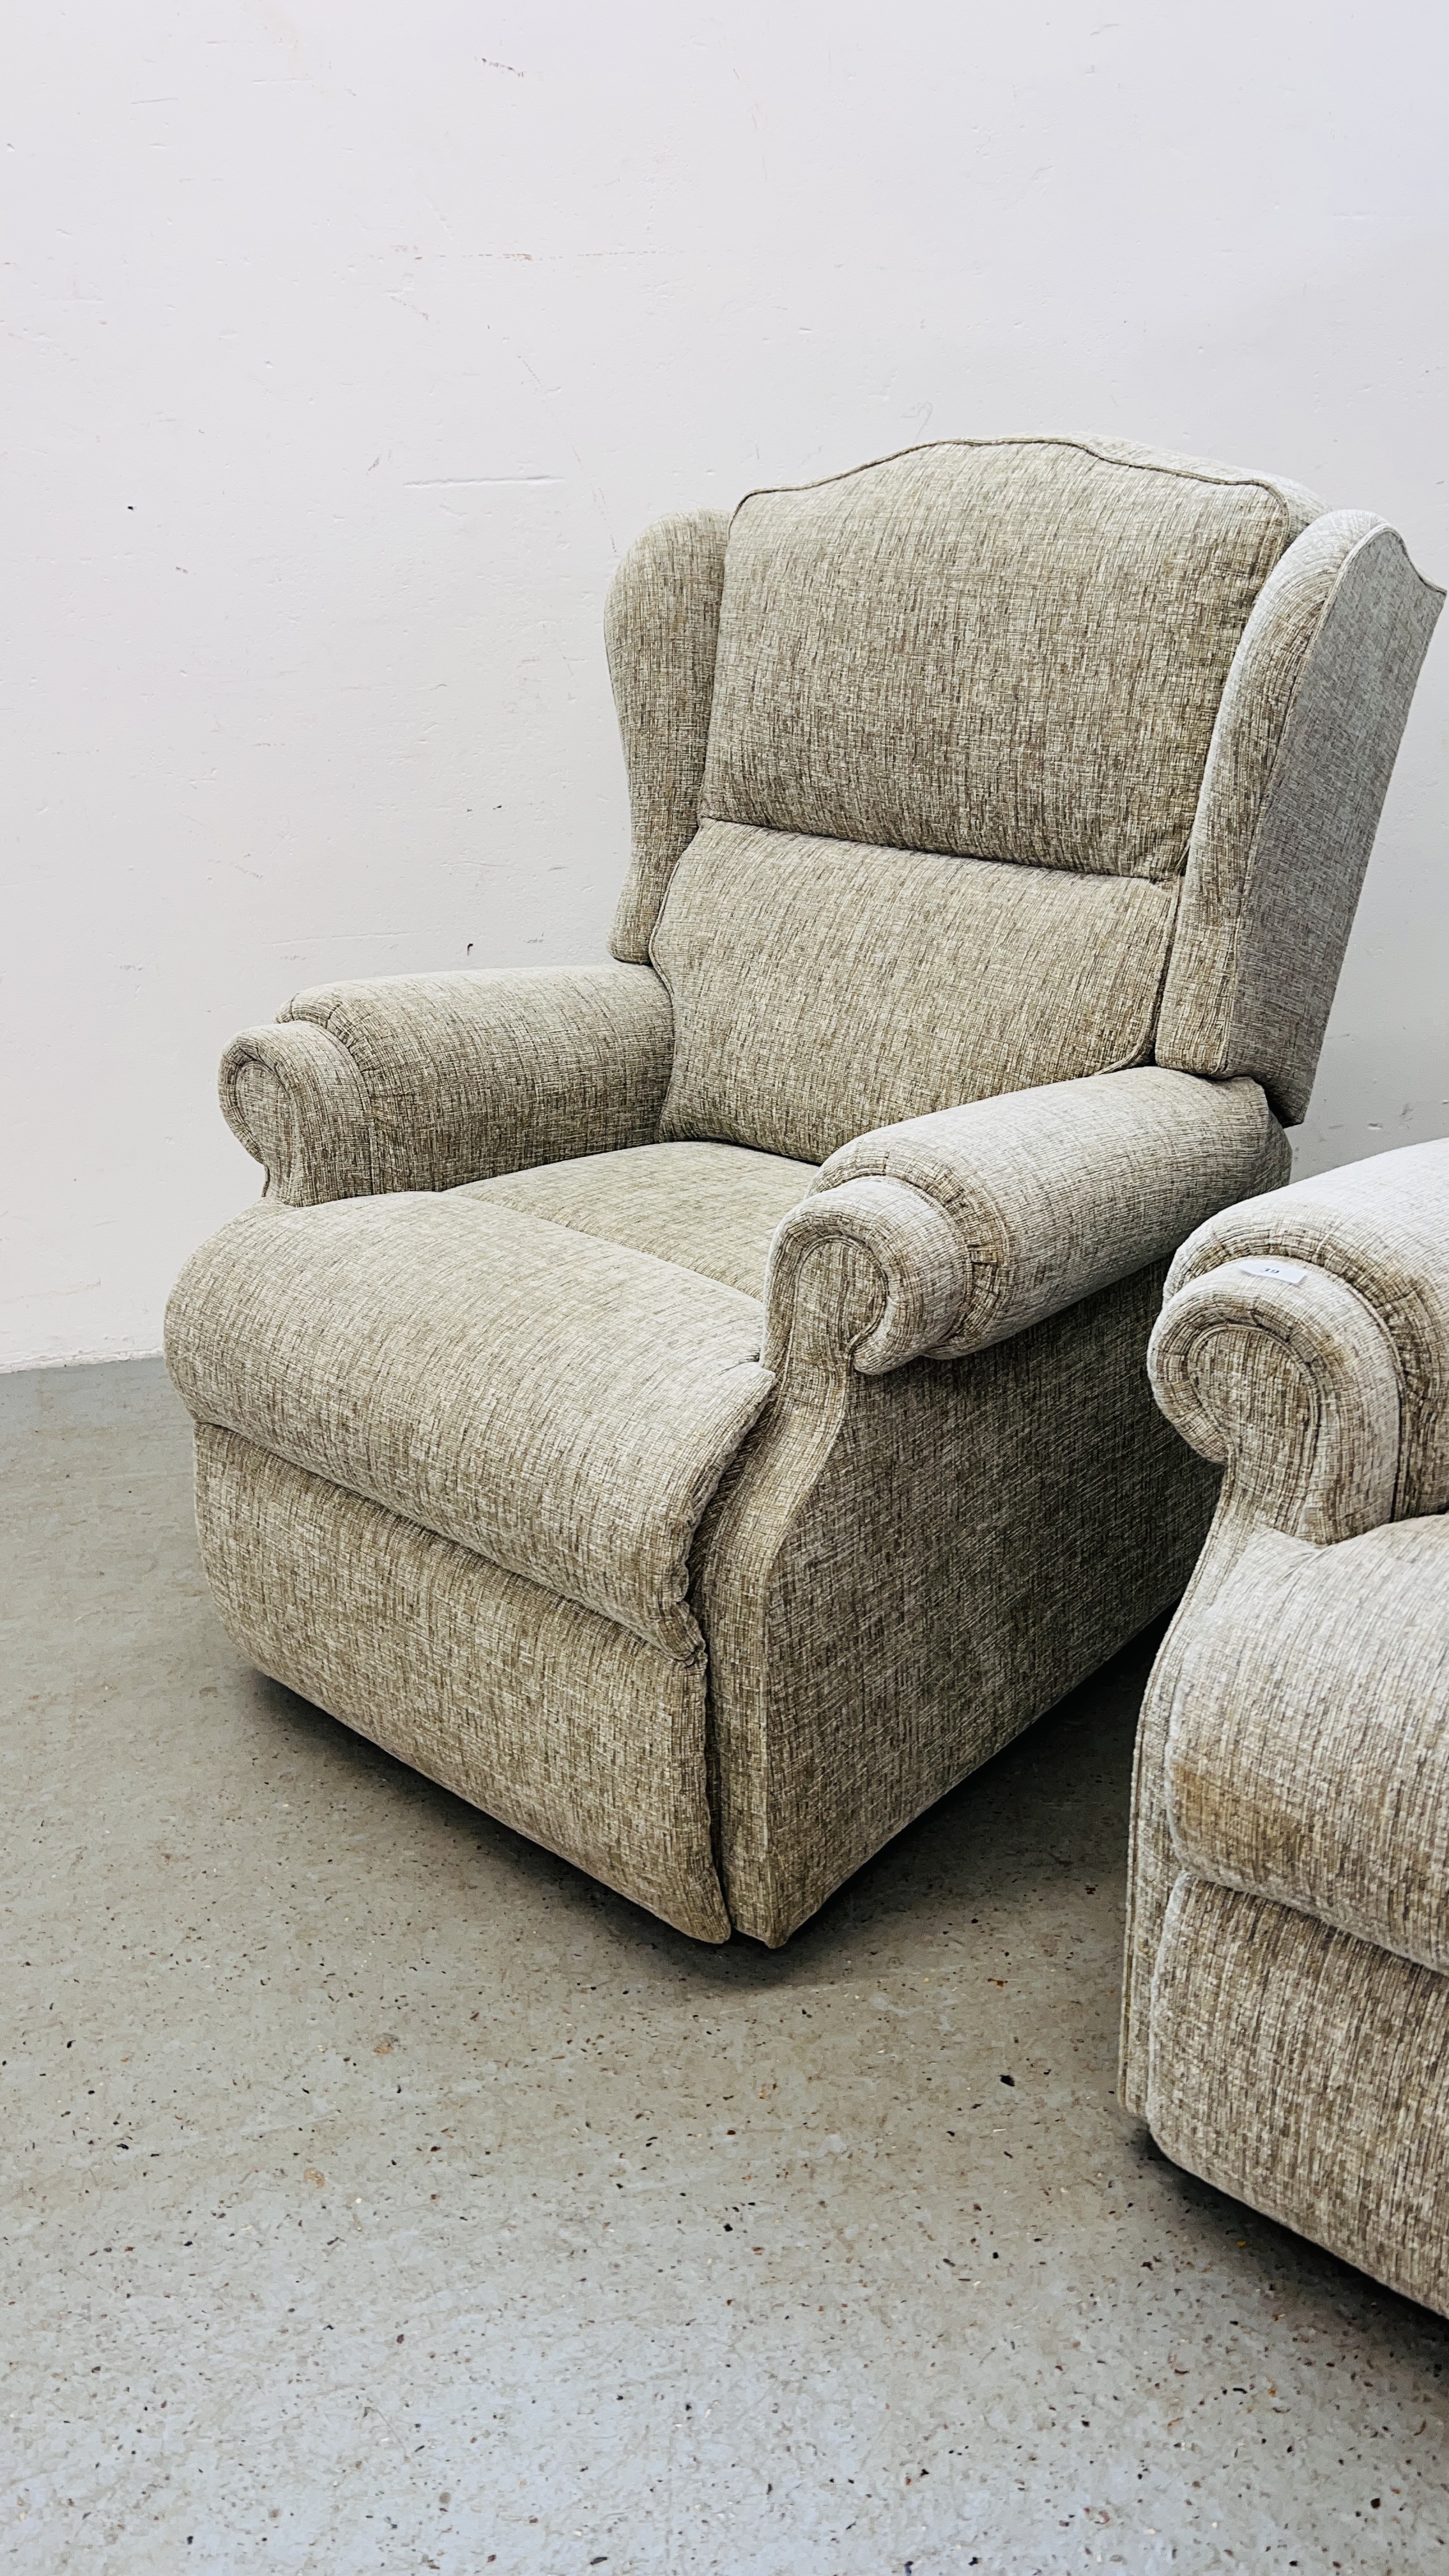 A GOOD QUALITY "SHERBORNE" TWO SEATER SOFA W 140CM X D 82CM X H 94CM ALONG WITH A MATCHING ARMCHAIR. - Image 8 of 14